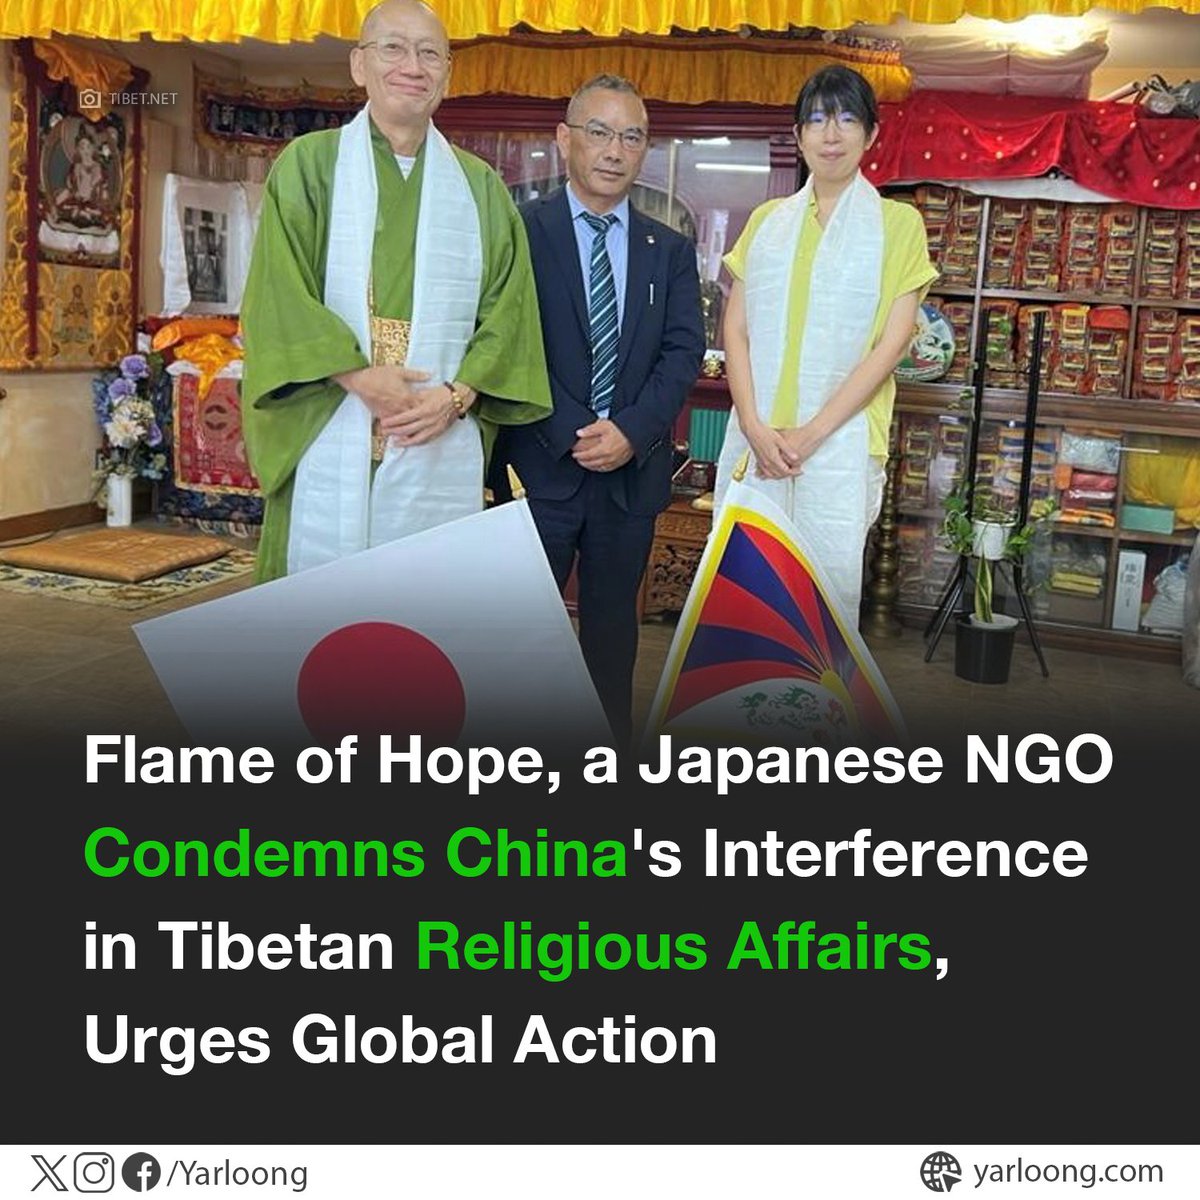 Flame of Hope NGO condemns #China's meddling in Tibetan religious selections, calls for international action to protect human rights and religious freedom in Tibet. #FlameOfHope #HumanRights #ReligiousFreedom #Tibet